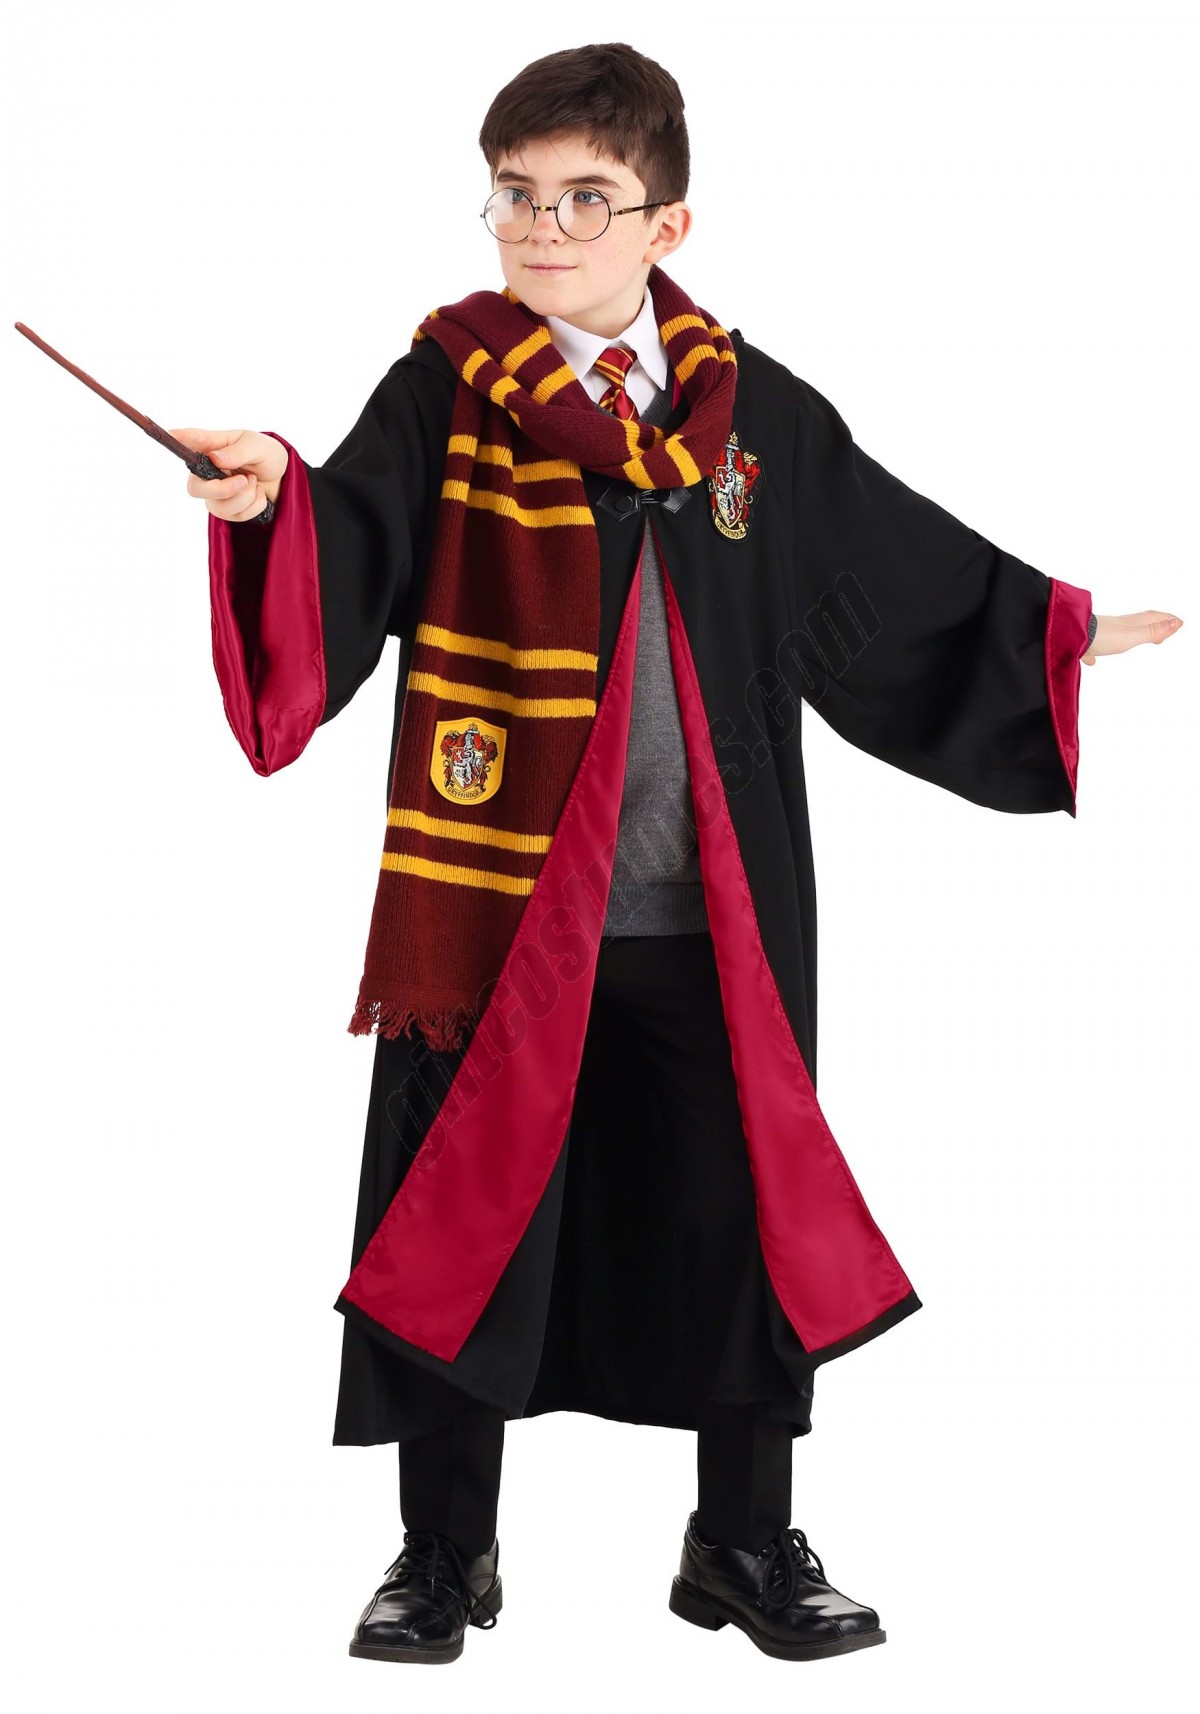 Deluxe Kid's Harry Potter Costume Promotions - -4